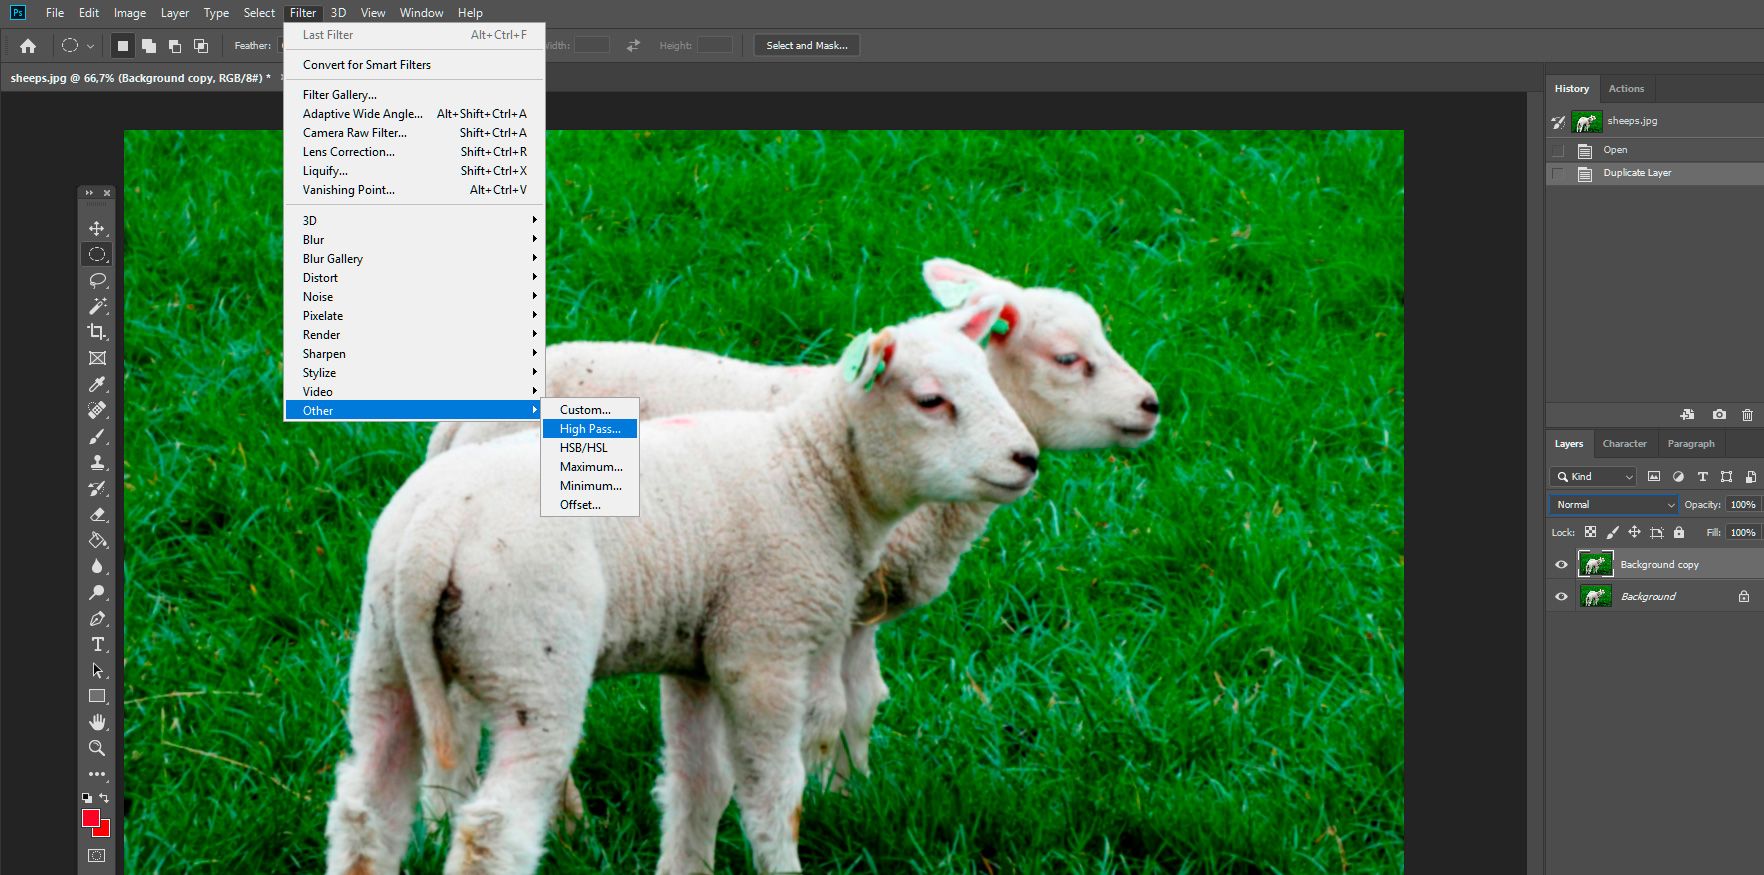 Click on High Pass Photoshop to reduce blur..